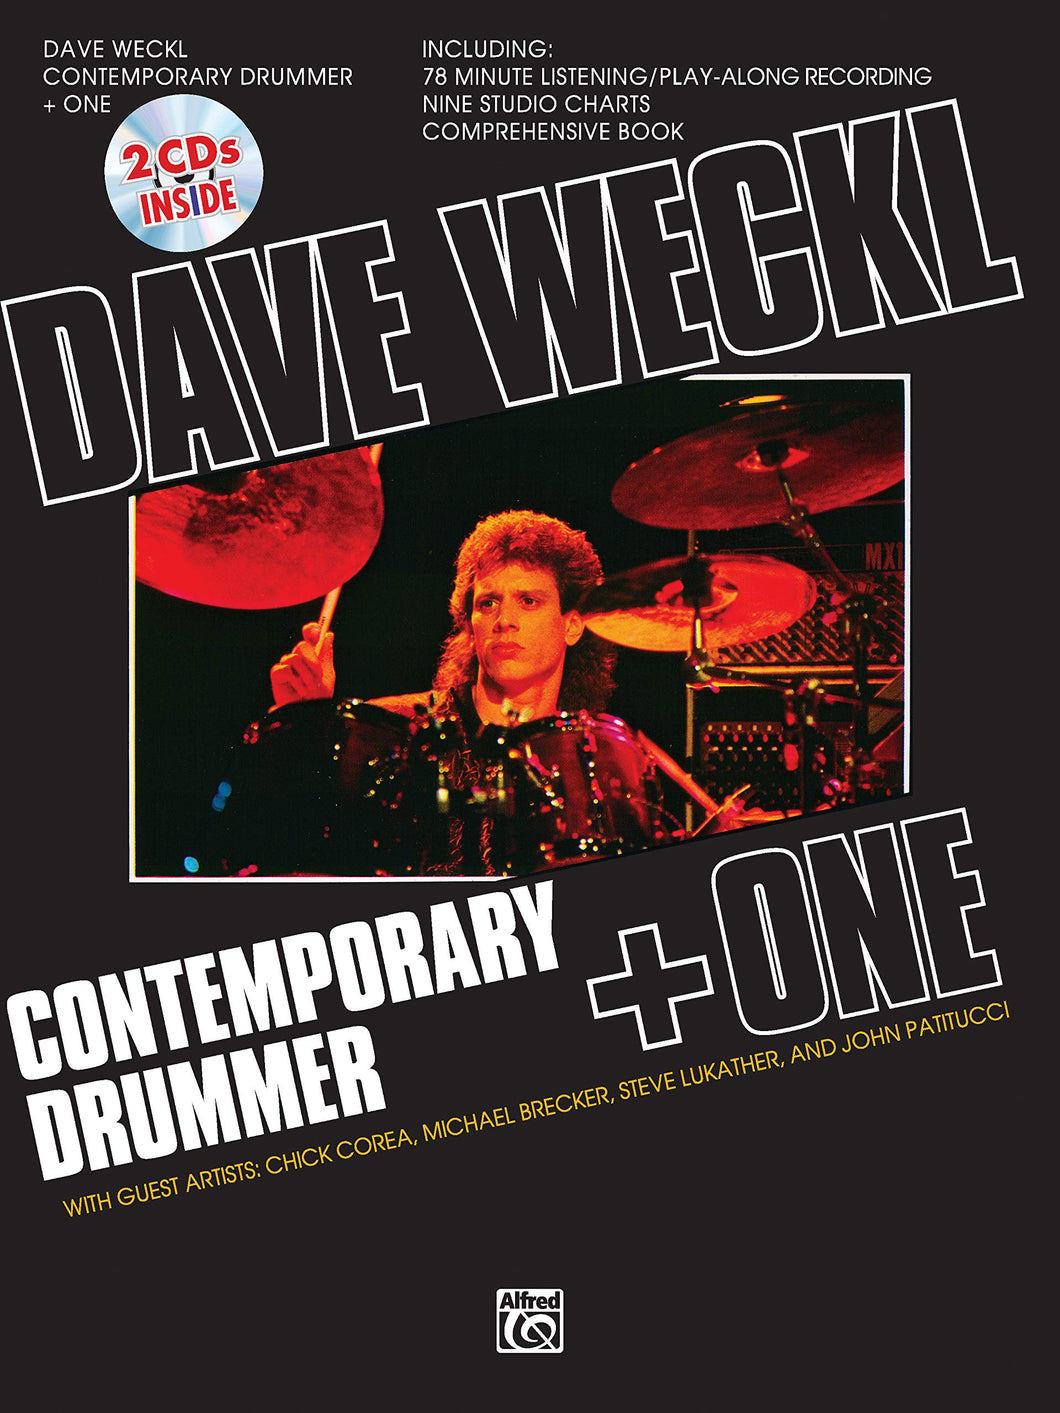 Dave Weckl – Contemporary Drummer + One publication cover